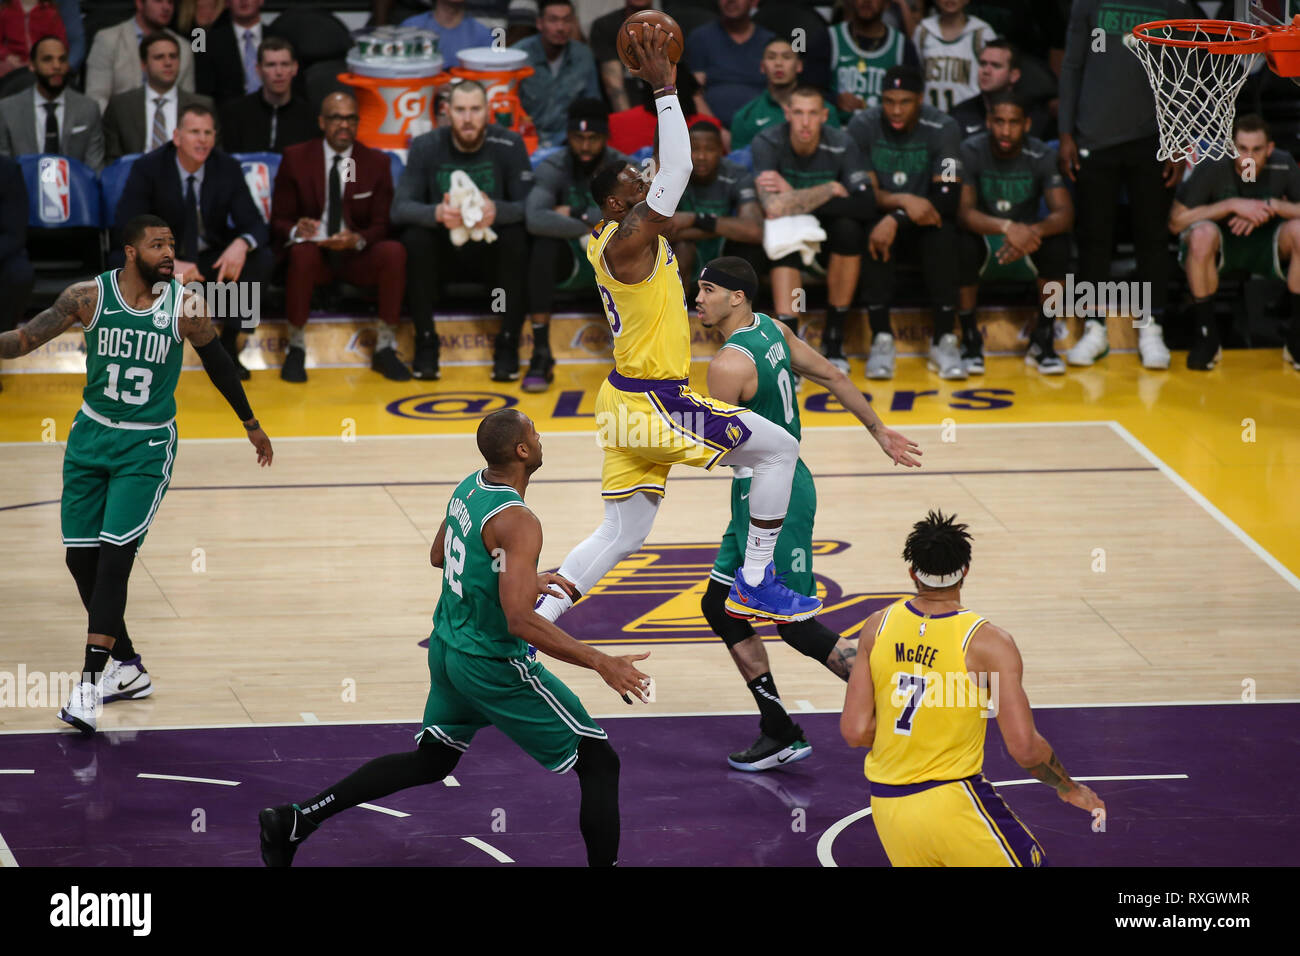 Los Angeles Lakers forward LeBron James #23 going in for a dunk during the Boston Celtics vs Los Angeles Lakers game at Staples Center in Los Angeles, CA on March 09, 2019. (Photo by Jevone Moore) Stock Photo